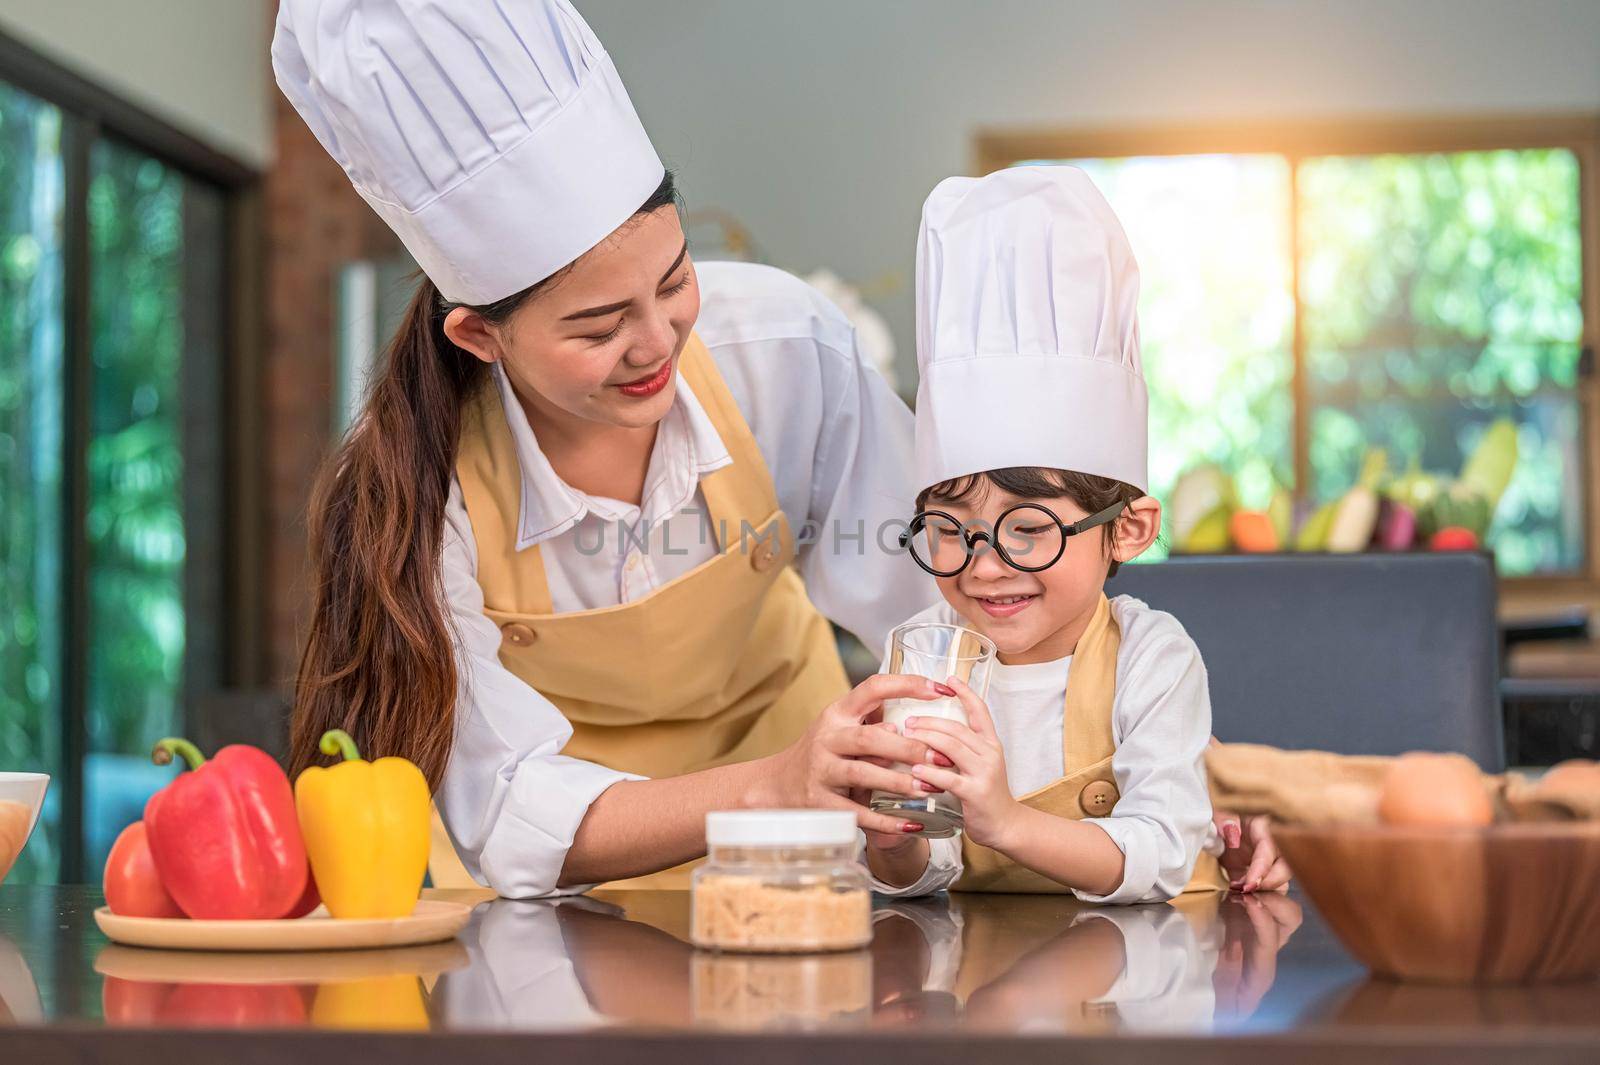 Asian mother helping cute little boy drinking milk in glass at home kitchen in chef cooking uniform. People lifestyles and Happy family togetherness concept. Calcium and protein in milk nutrition by MiniStocker